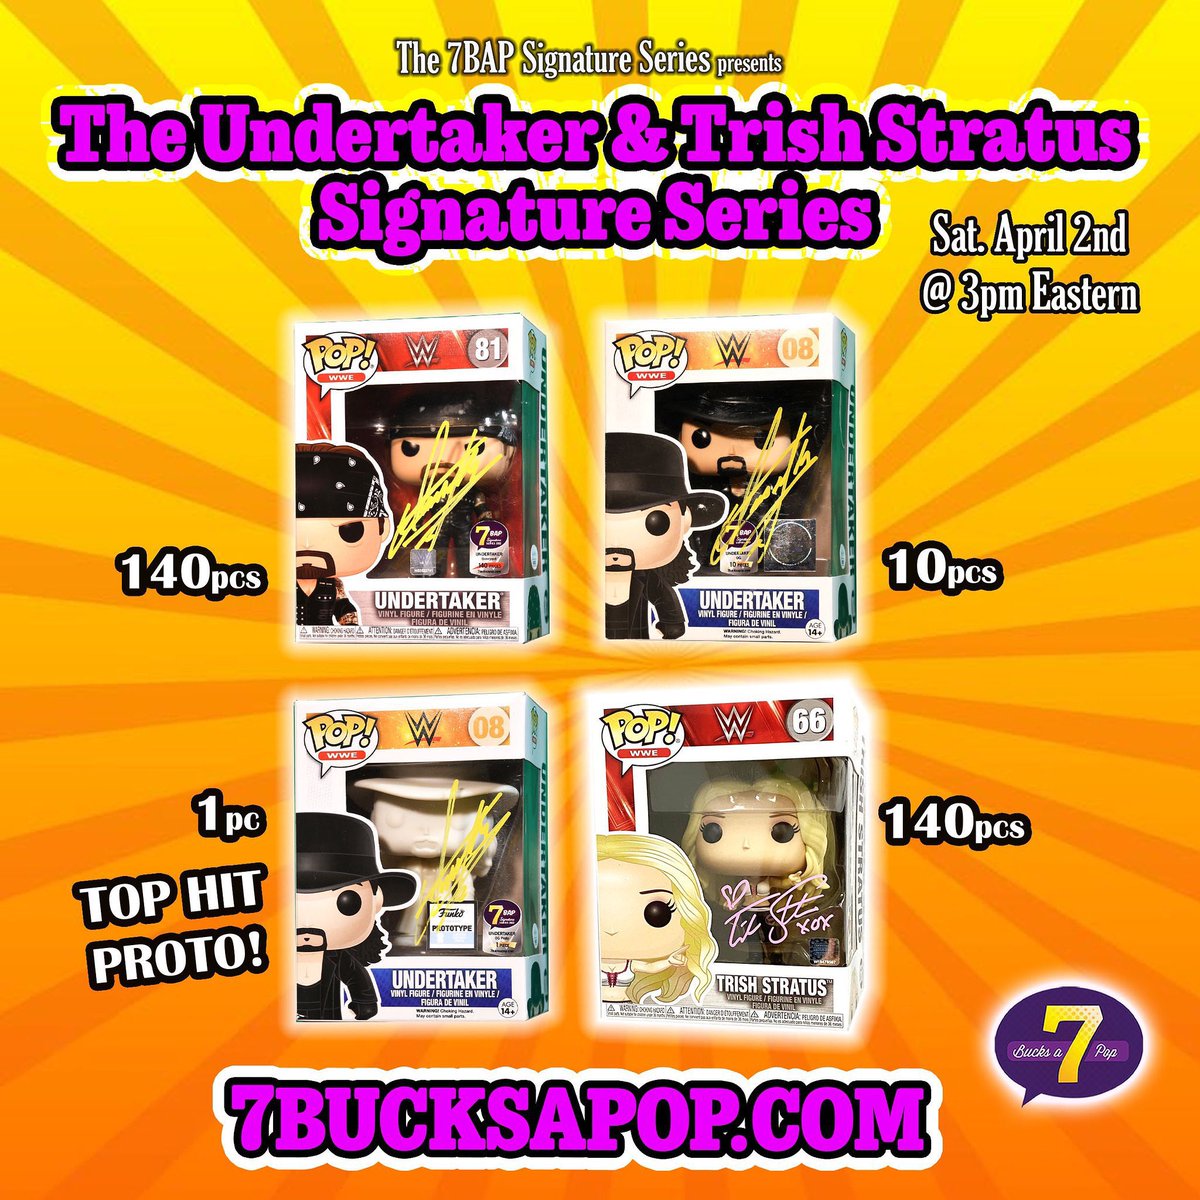 https://t.co/JSkcKUdZCC ALLwrestling fans out there, the Undertaker and Trish Stratus have autographed and Authenticated Funko Pops available right now on @7BucksAPop https://t.co/yYPyYwUjHV